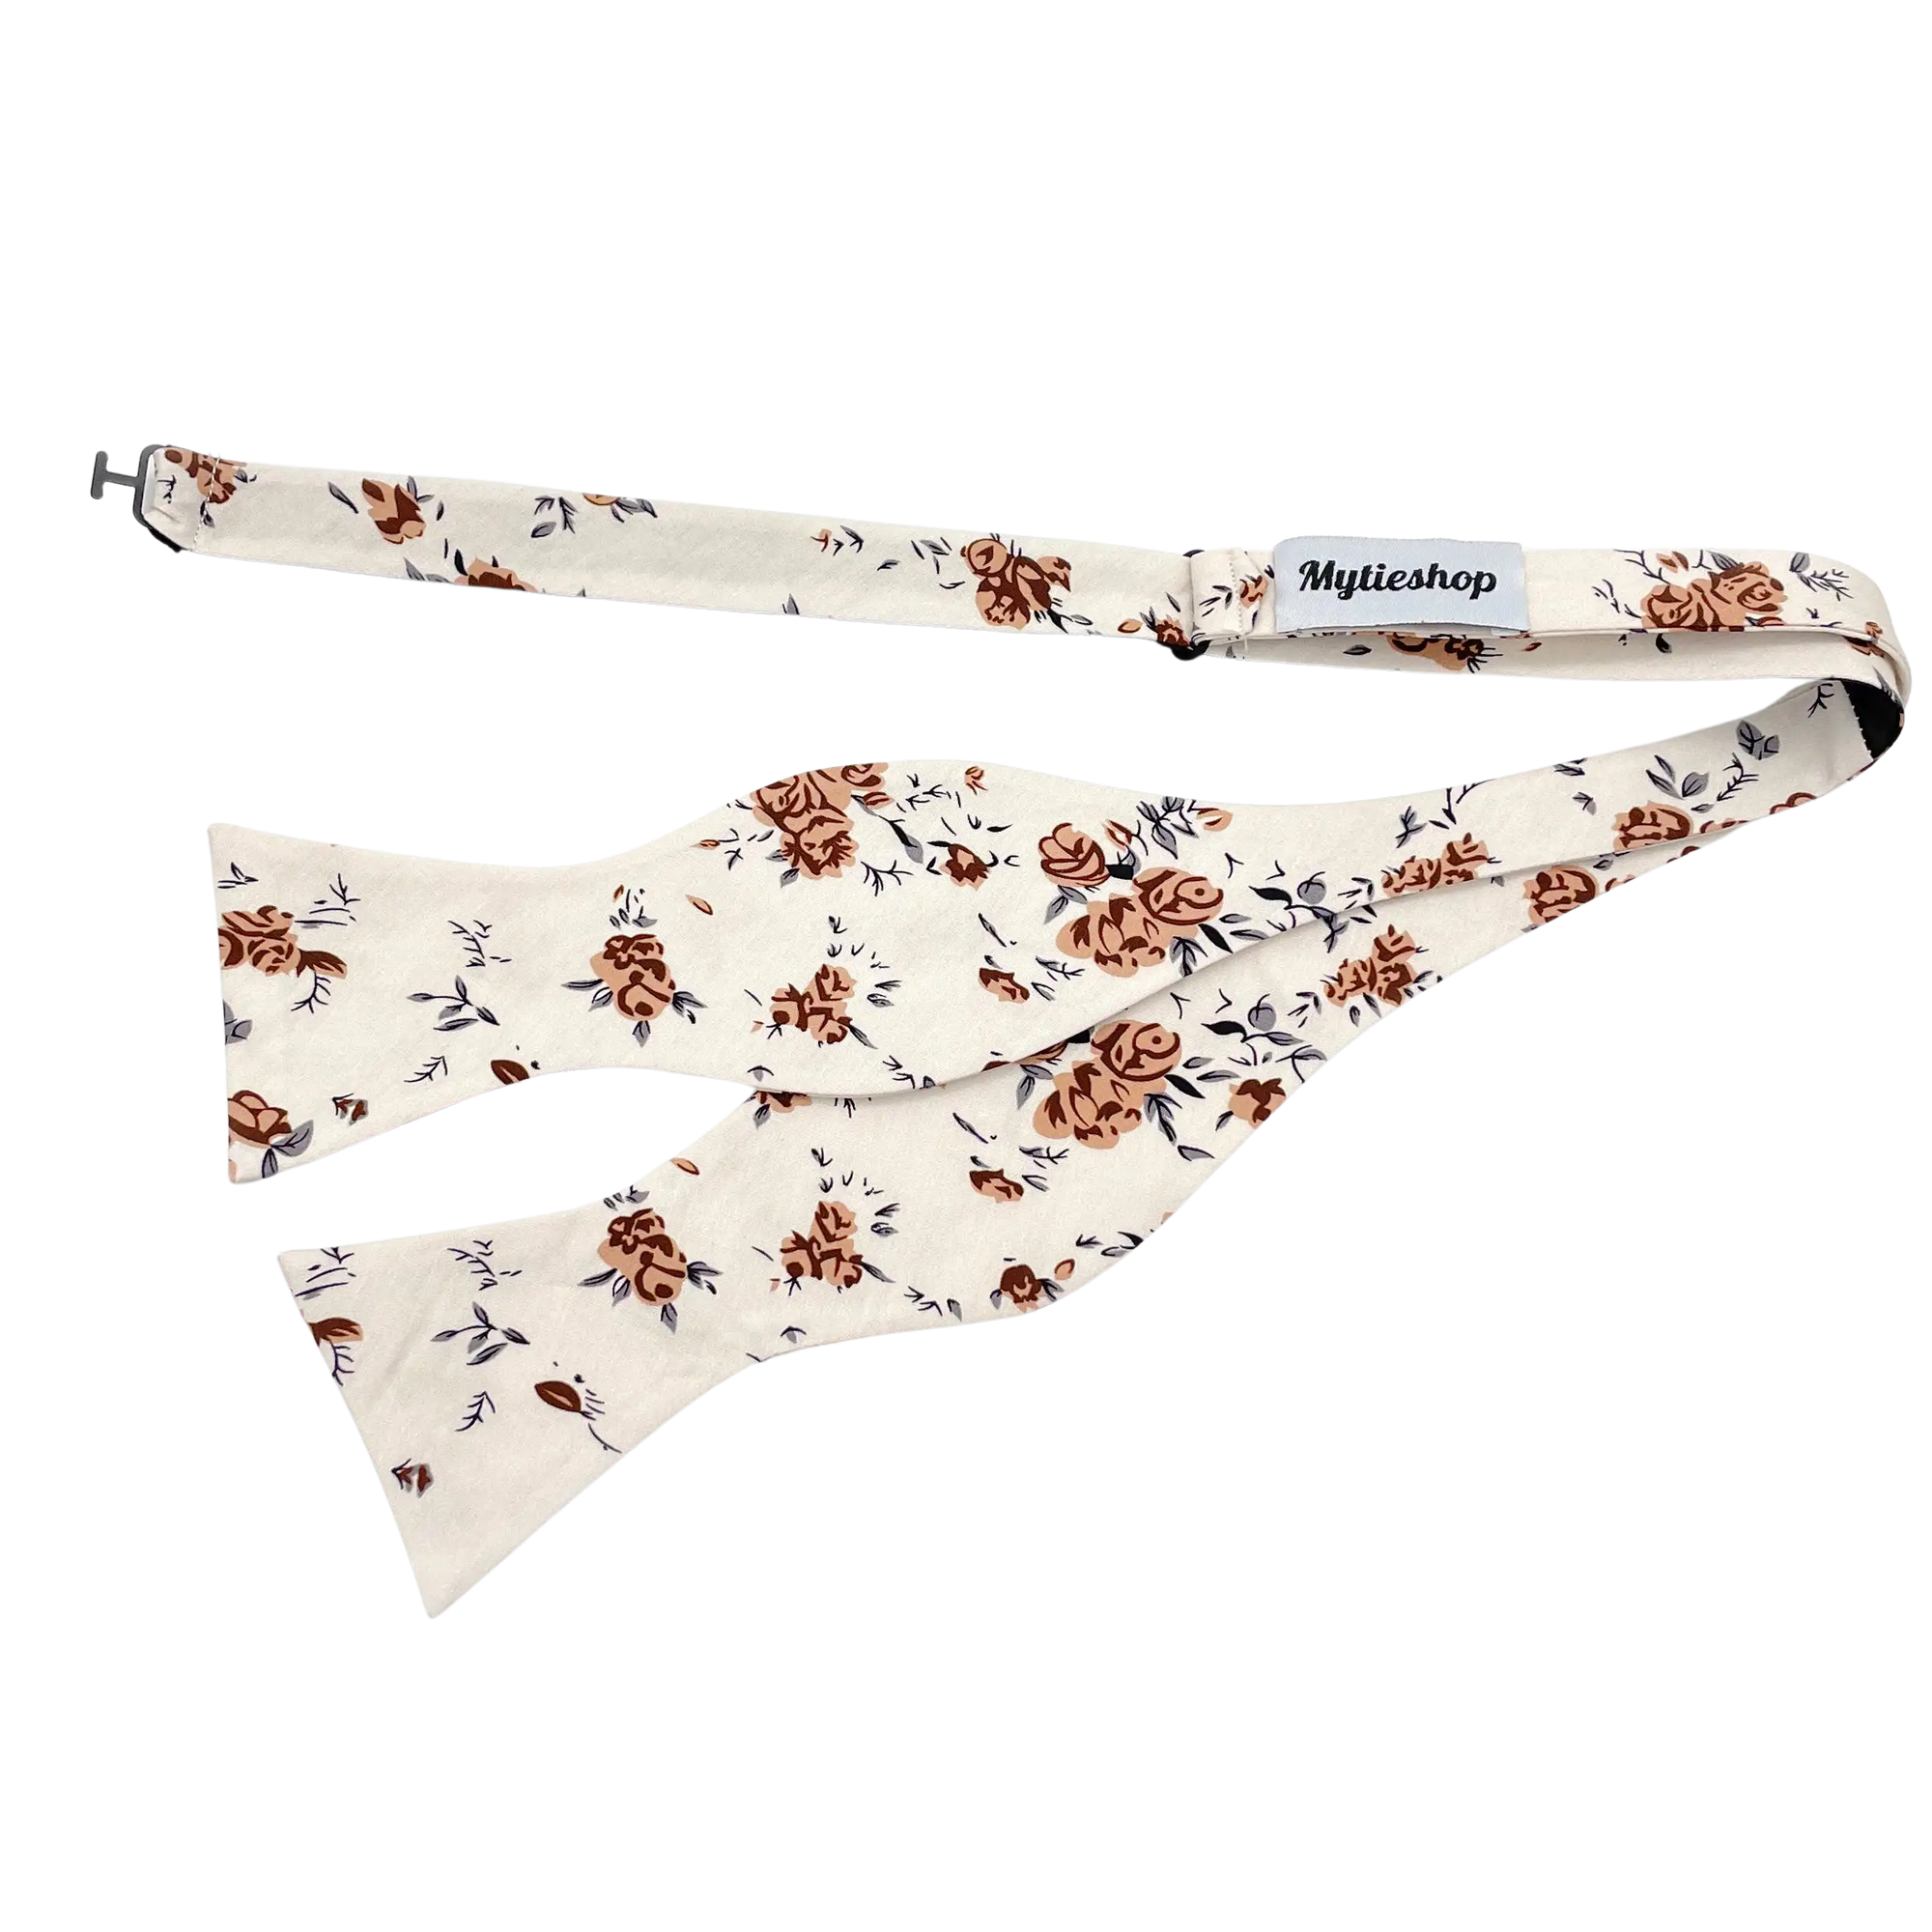 Beige Floral Bow Tie Self Tie with Brown Flowers for Men-Beige Floral Bow Tie Self Tie with Brown Flowers for Men Great for Weddings. 100% Linen Handmade Adjustable to fit most neck sizes 13 3/4" - 18" Beige in color Great for: Groom Groomsmen Wedding Shoots Formal Prom Fancy Parties Gifts and presents Beige floral tie self tie. Oatmeal. Beige. Champagne color theme. Monochromatic. Fall weddings. Ties. Tie. Groomsmen ideas colors. Beige and Brown Floral Bow Tie for weddings groom Beige Self tie 